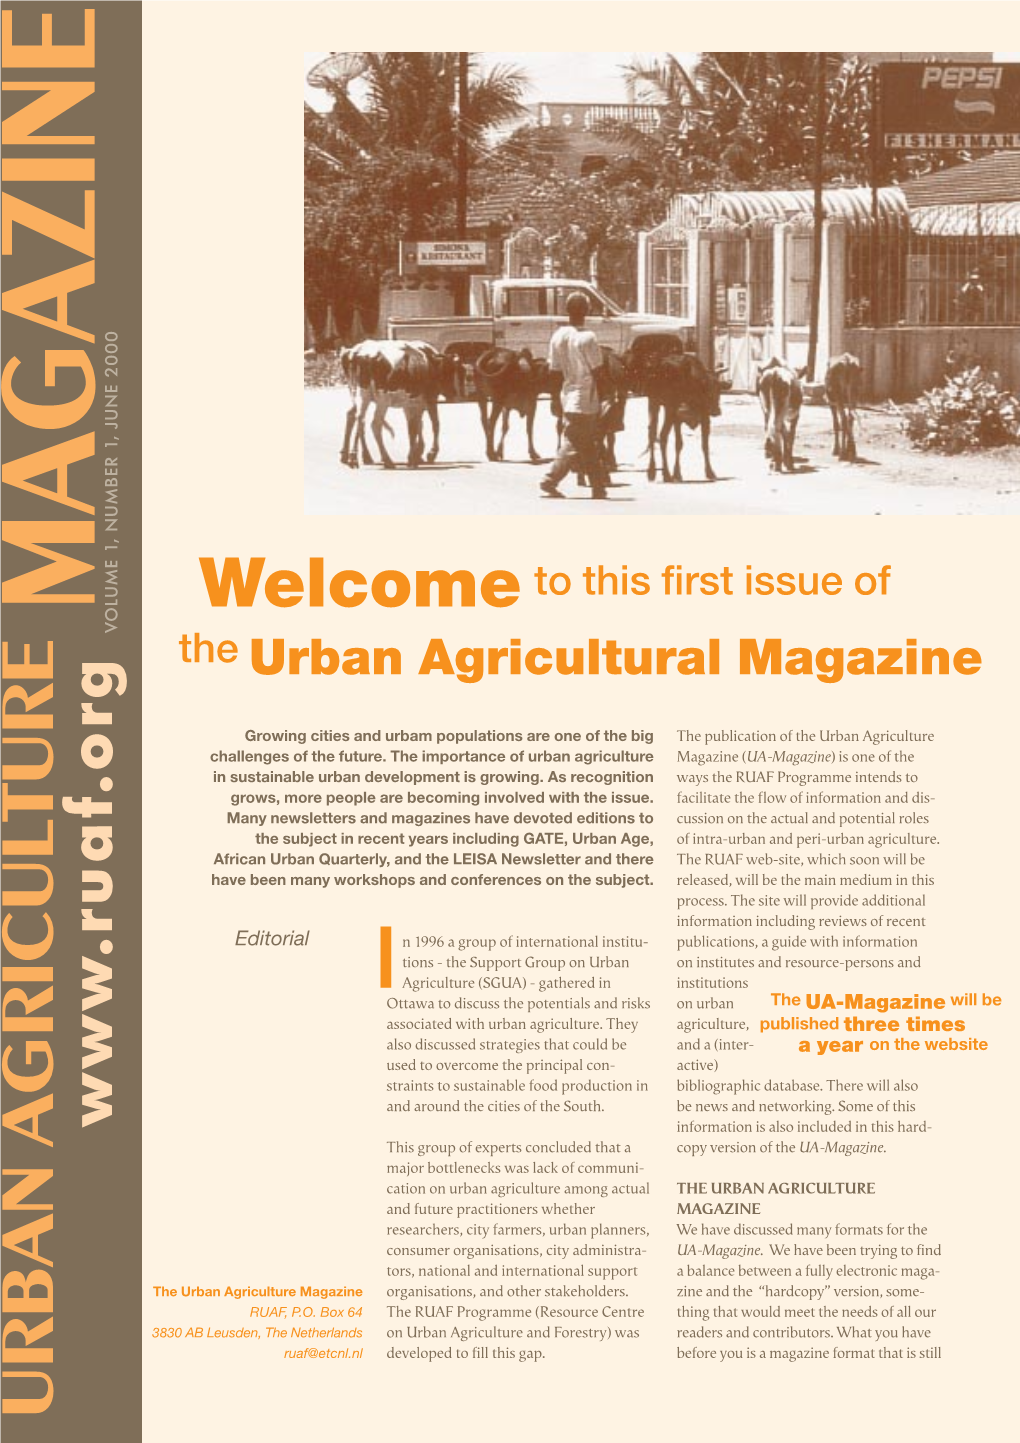 Urban Agriculture Challenges of the Future